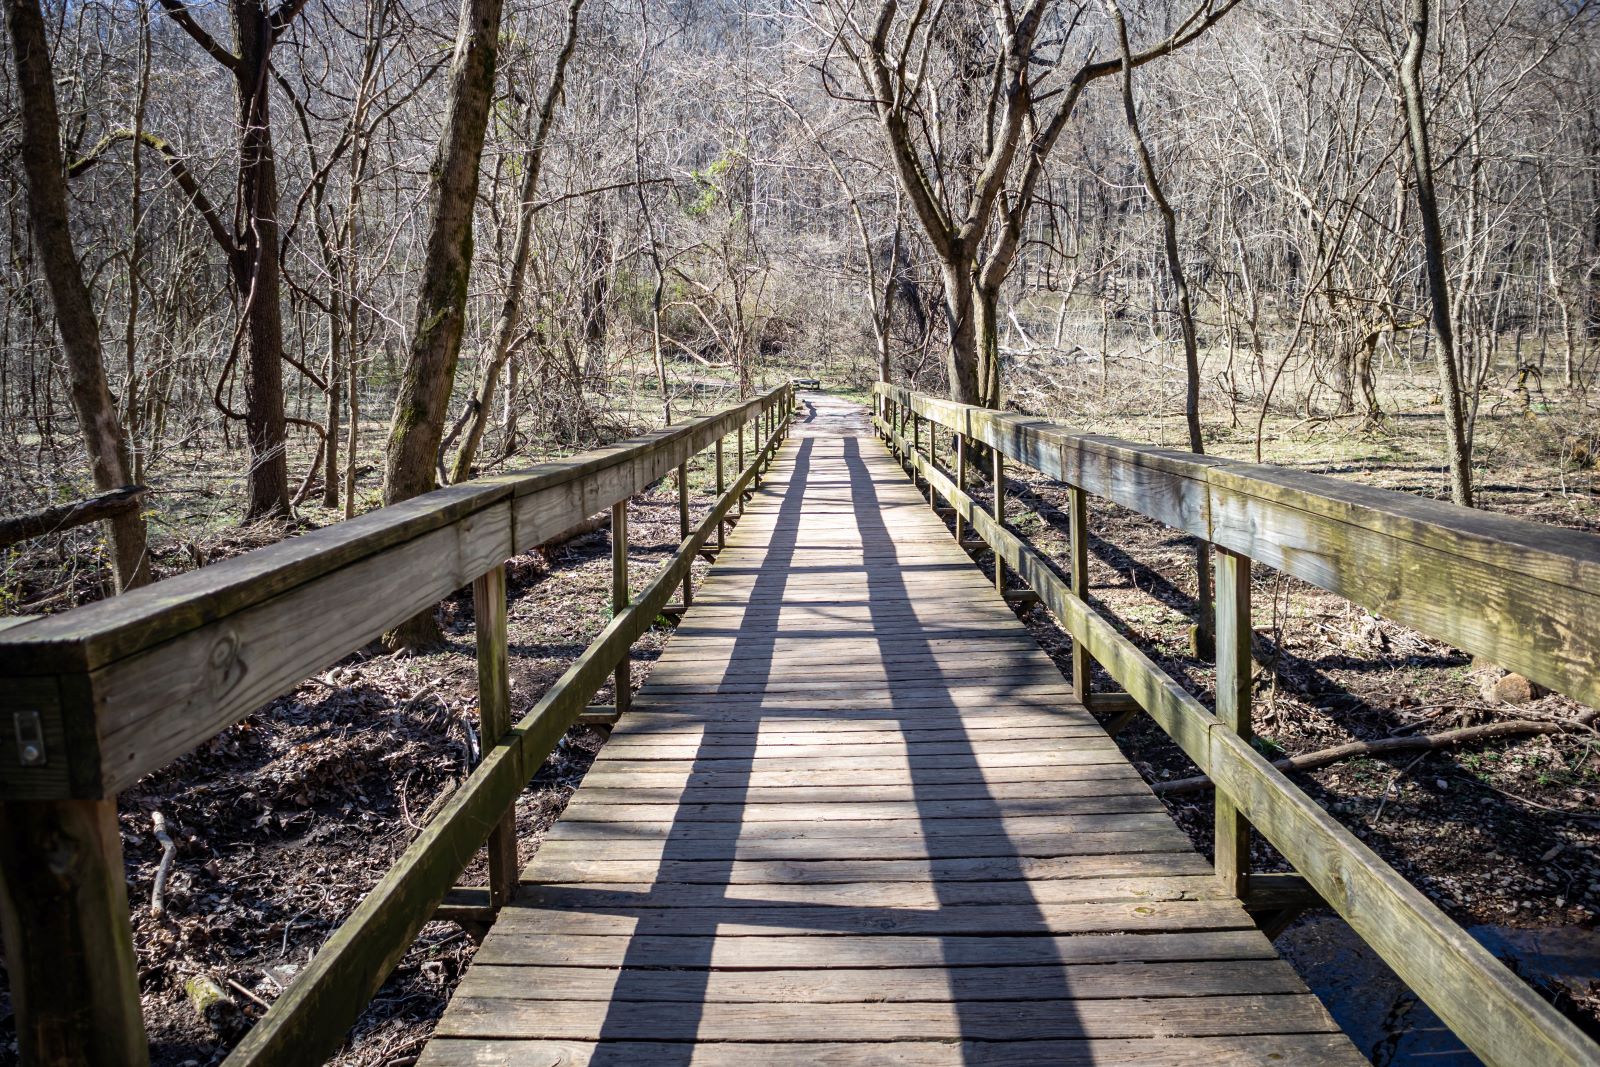 <p class="wp-caption-text">Image Credit: Shutterstock / Wirestock Creators</p>  <p>Escape the city and immerse yourself in nature at Radnor Lake State Park. Lace up your hiking boots and explore scenic trails that wind through lush forests and around tranquil lakes.</p>